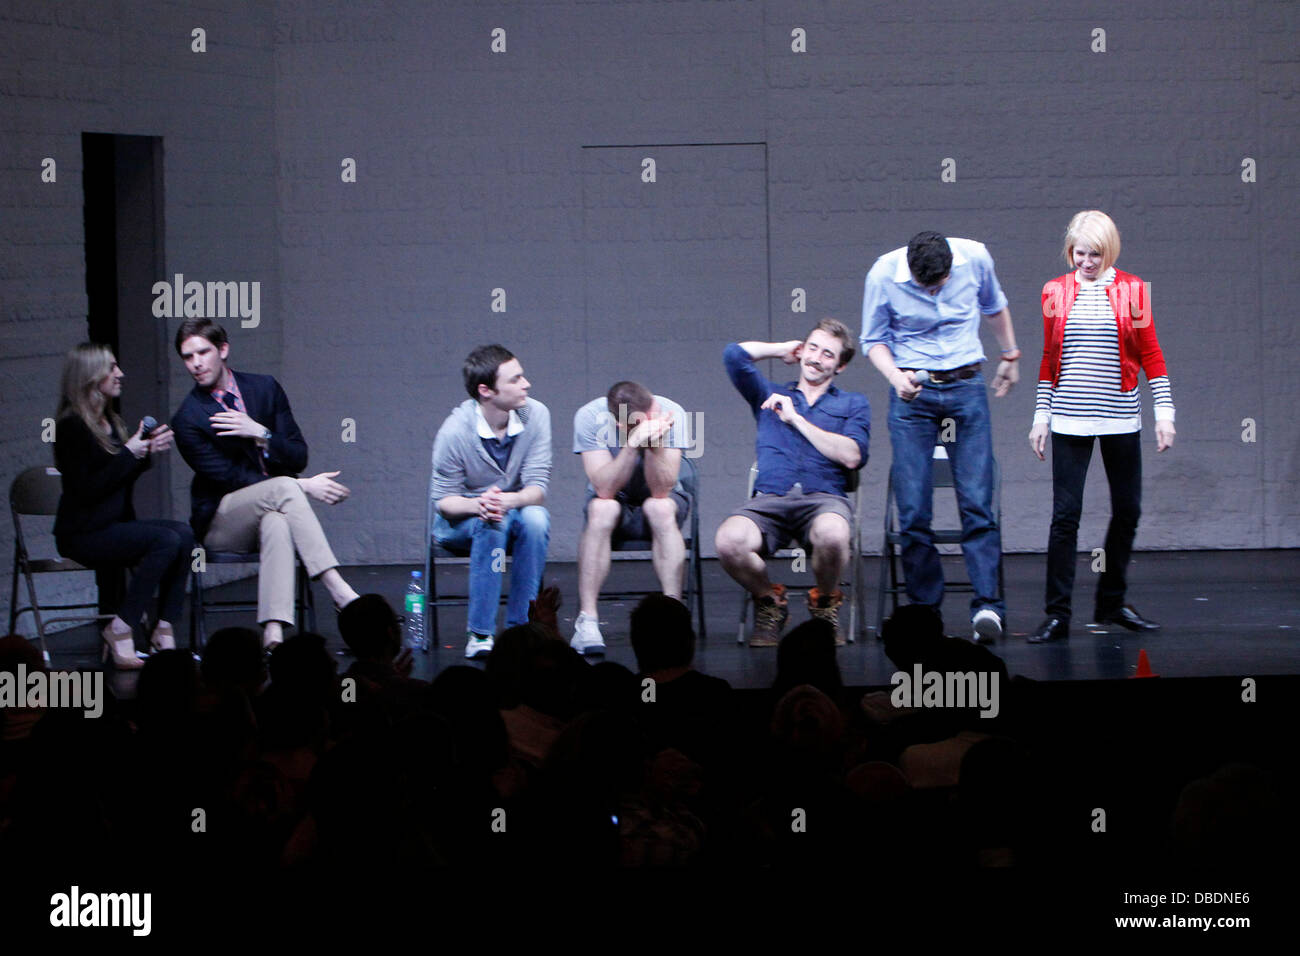 Hosts: Blake Ross and Frank DiLella with Jim Parsons, Luke Macfarlane, Lee Pace, Wayne Alan Wilcox and Ellen Barkin Post-show talk back with the cast of the Broadway production 'The Normal Heart' at the Golden Theatre New York City, USA - 26.05.11 Stock Photo